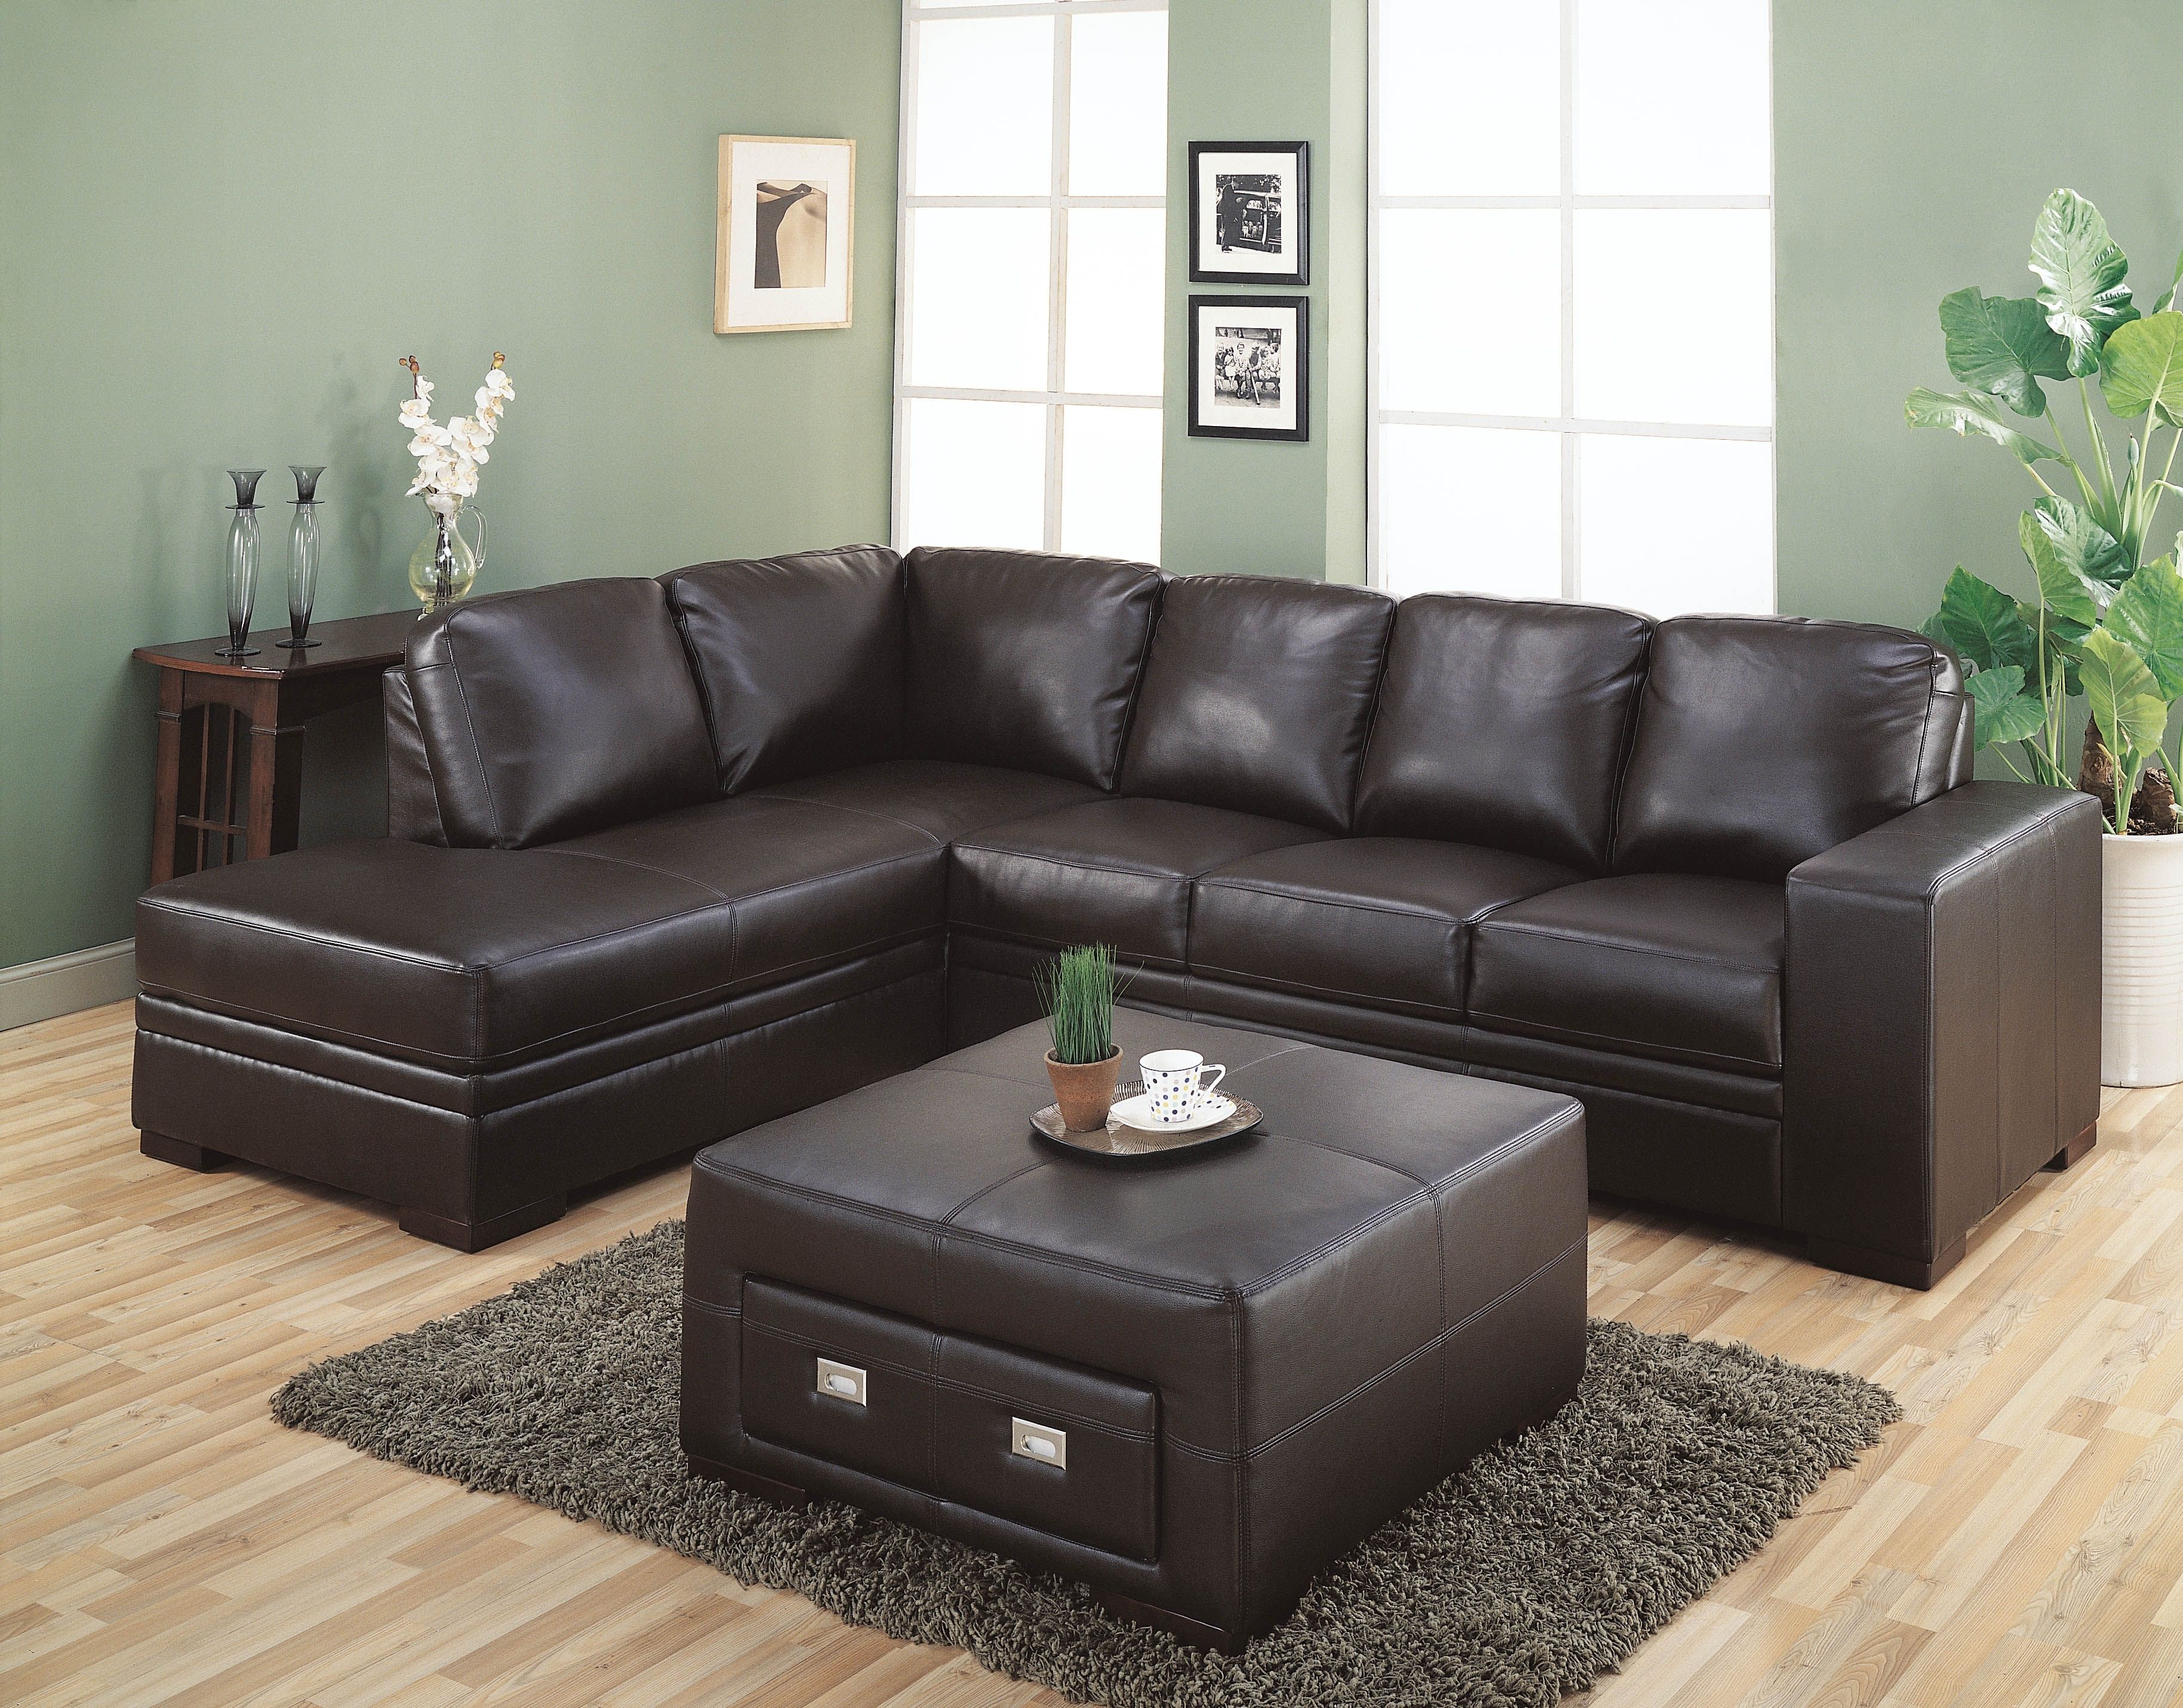 Featured Photo of 10 The Best Memphis Tn Sectional Sofas